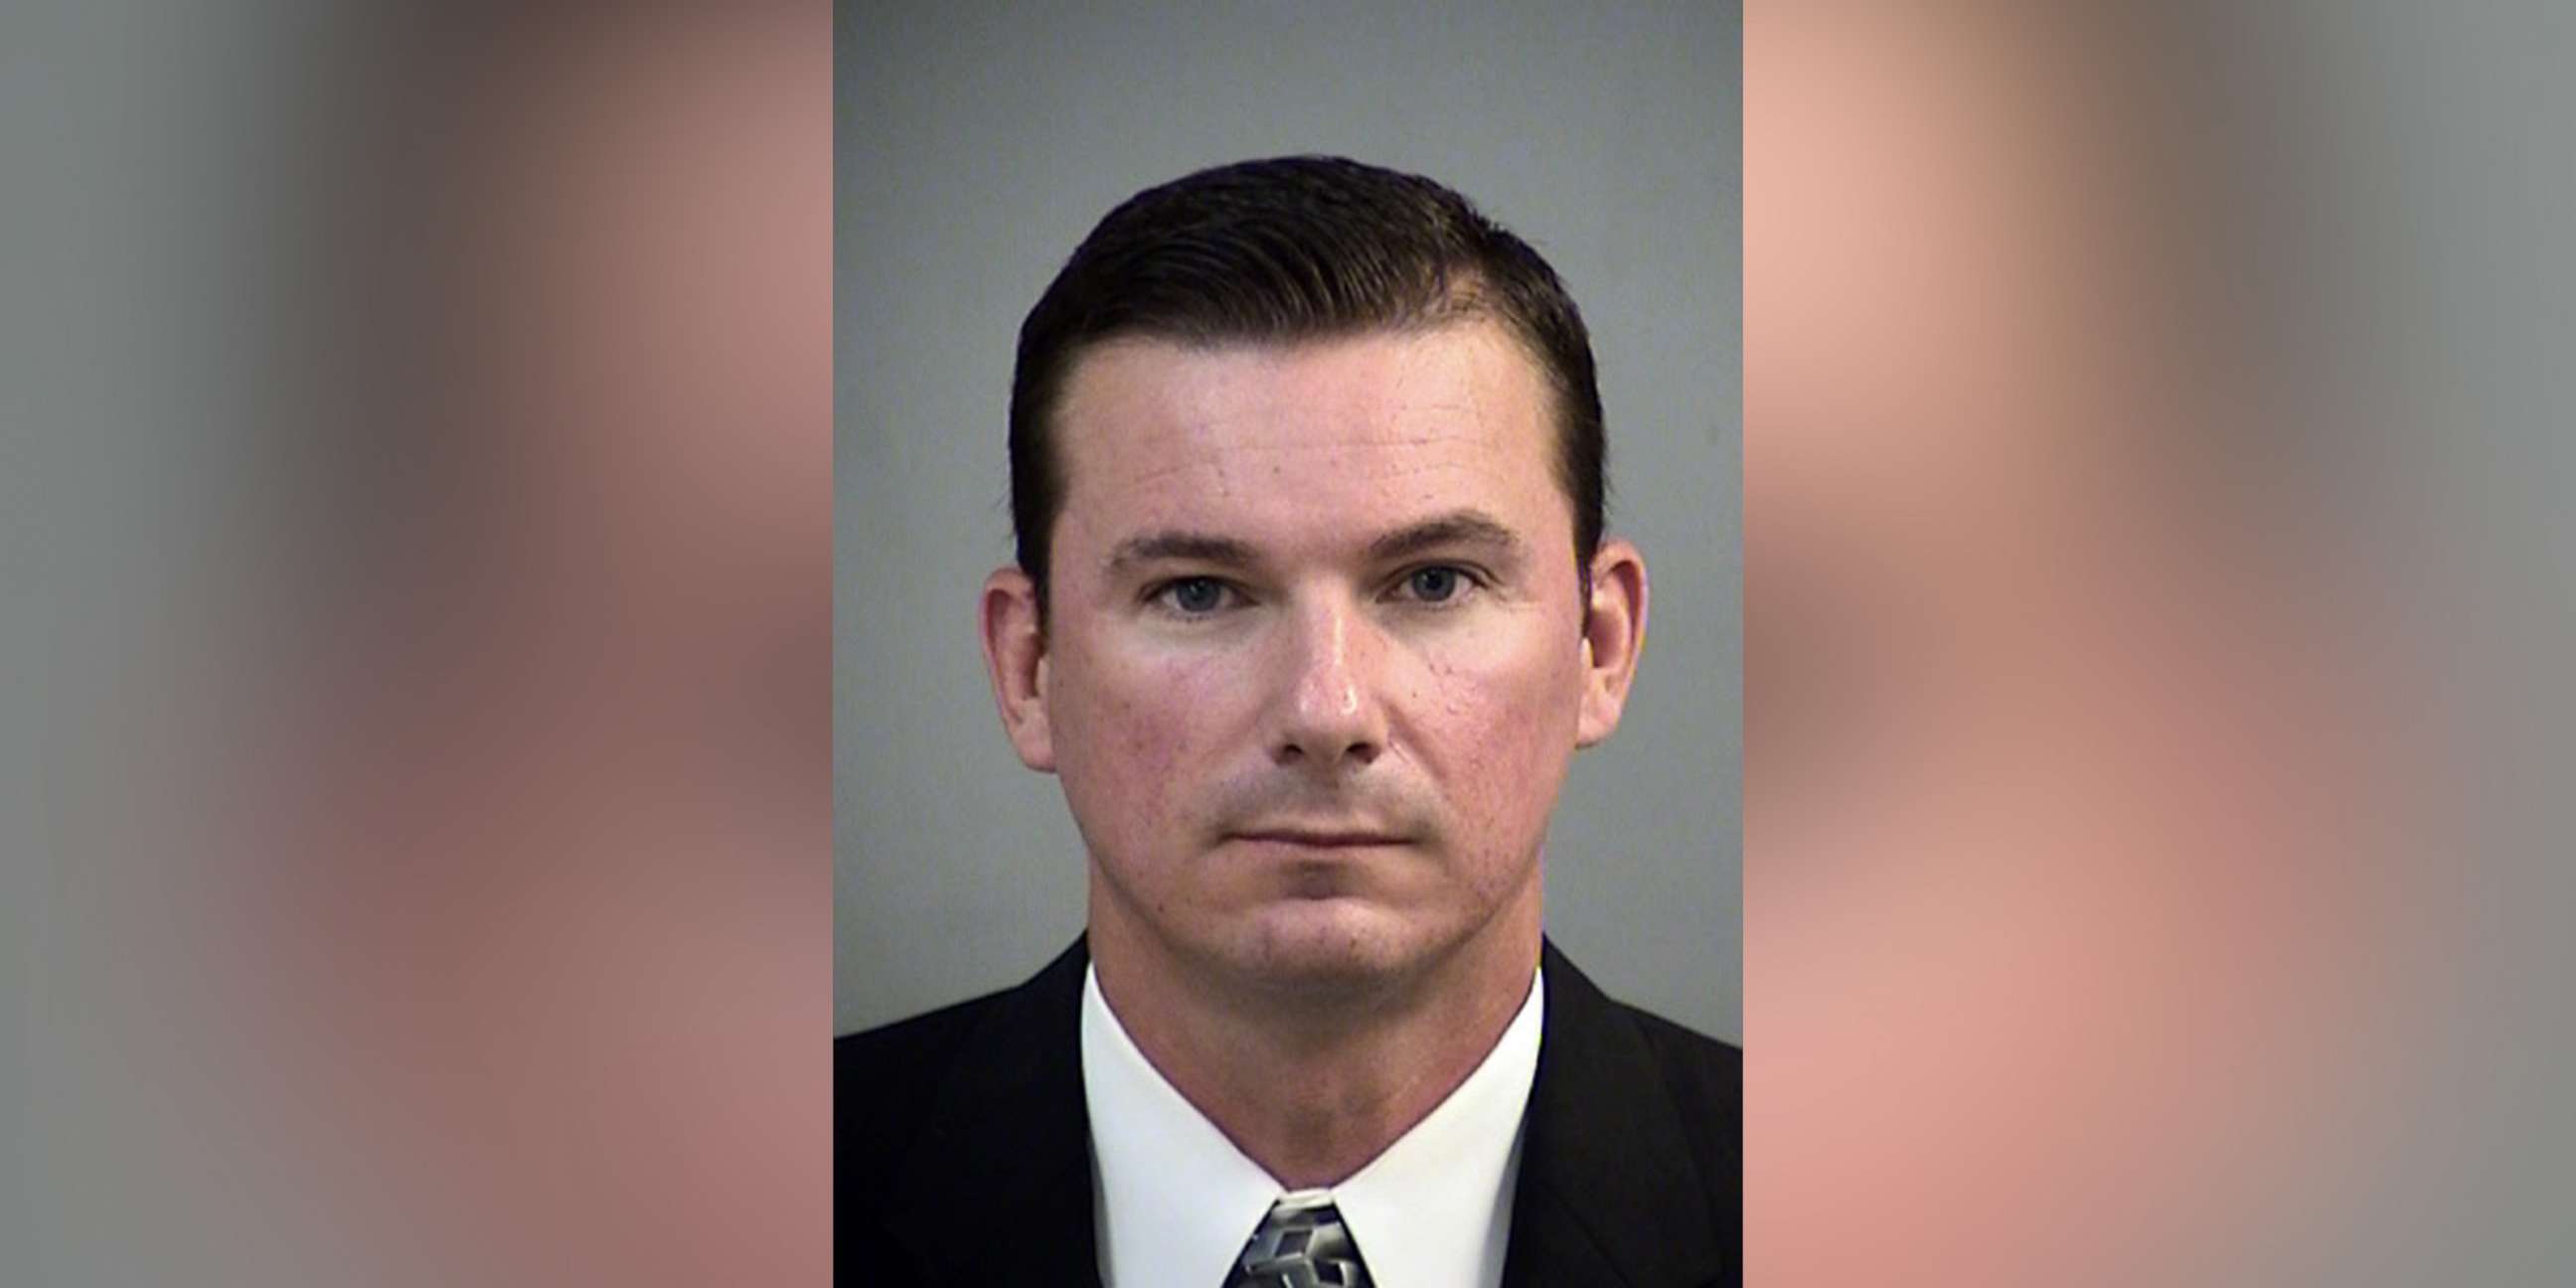 PHOTO: Officer Robert Lawson has been charged with battery following the incident that was caught on camera on Aug. 29, 2019.